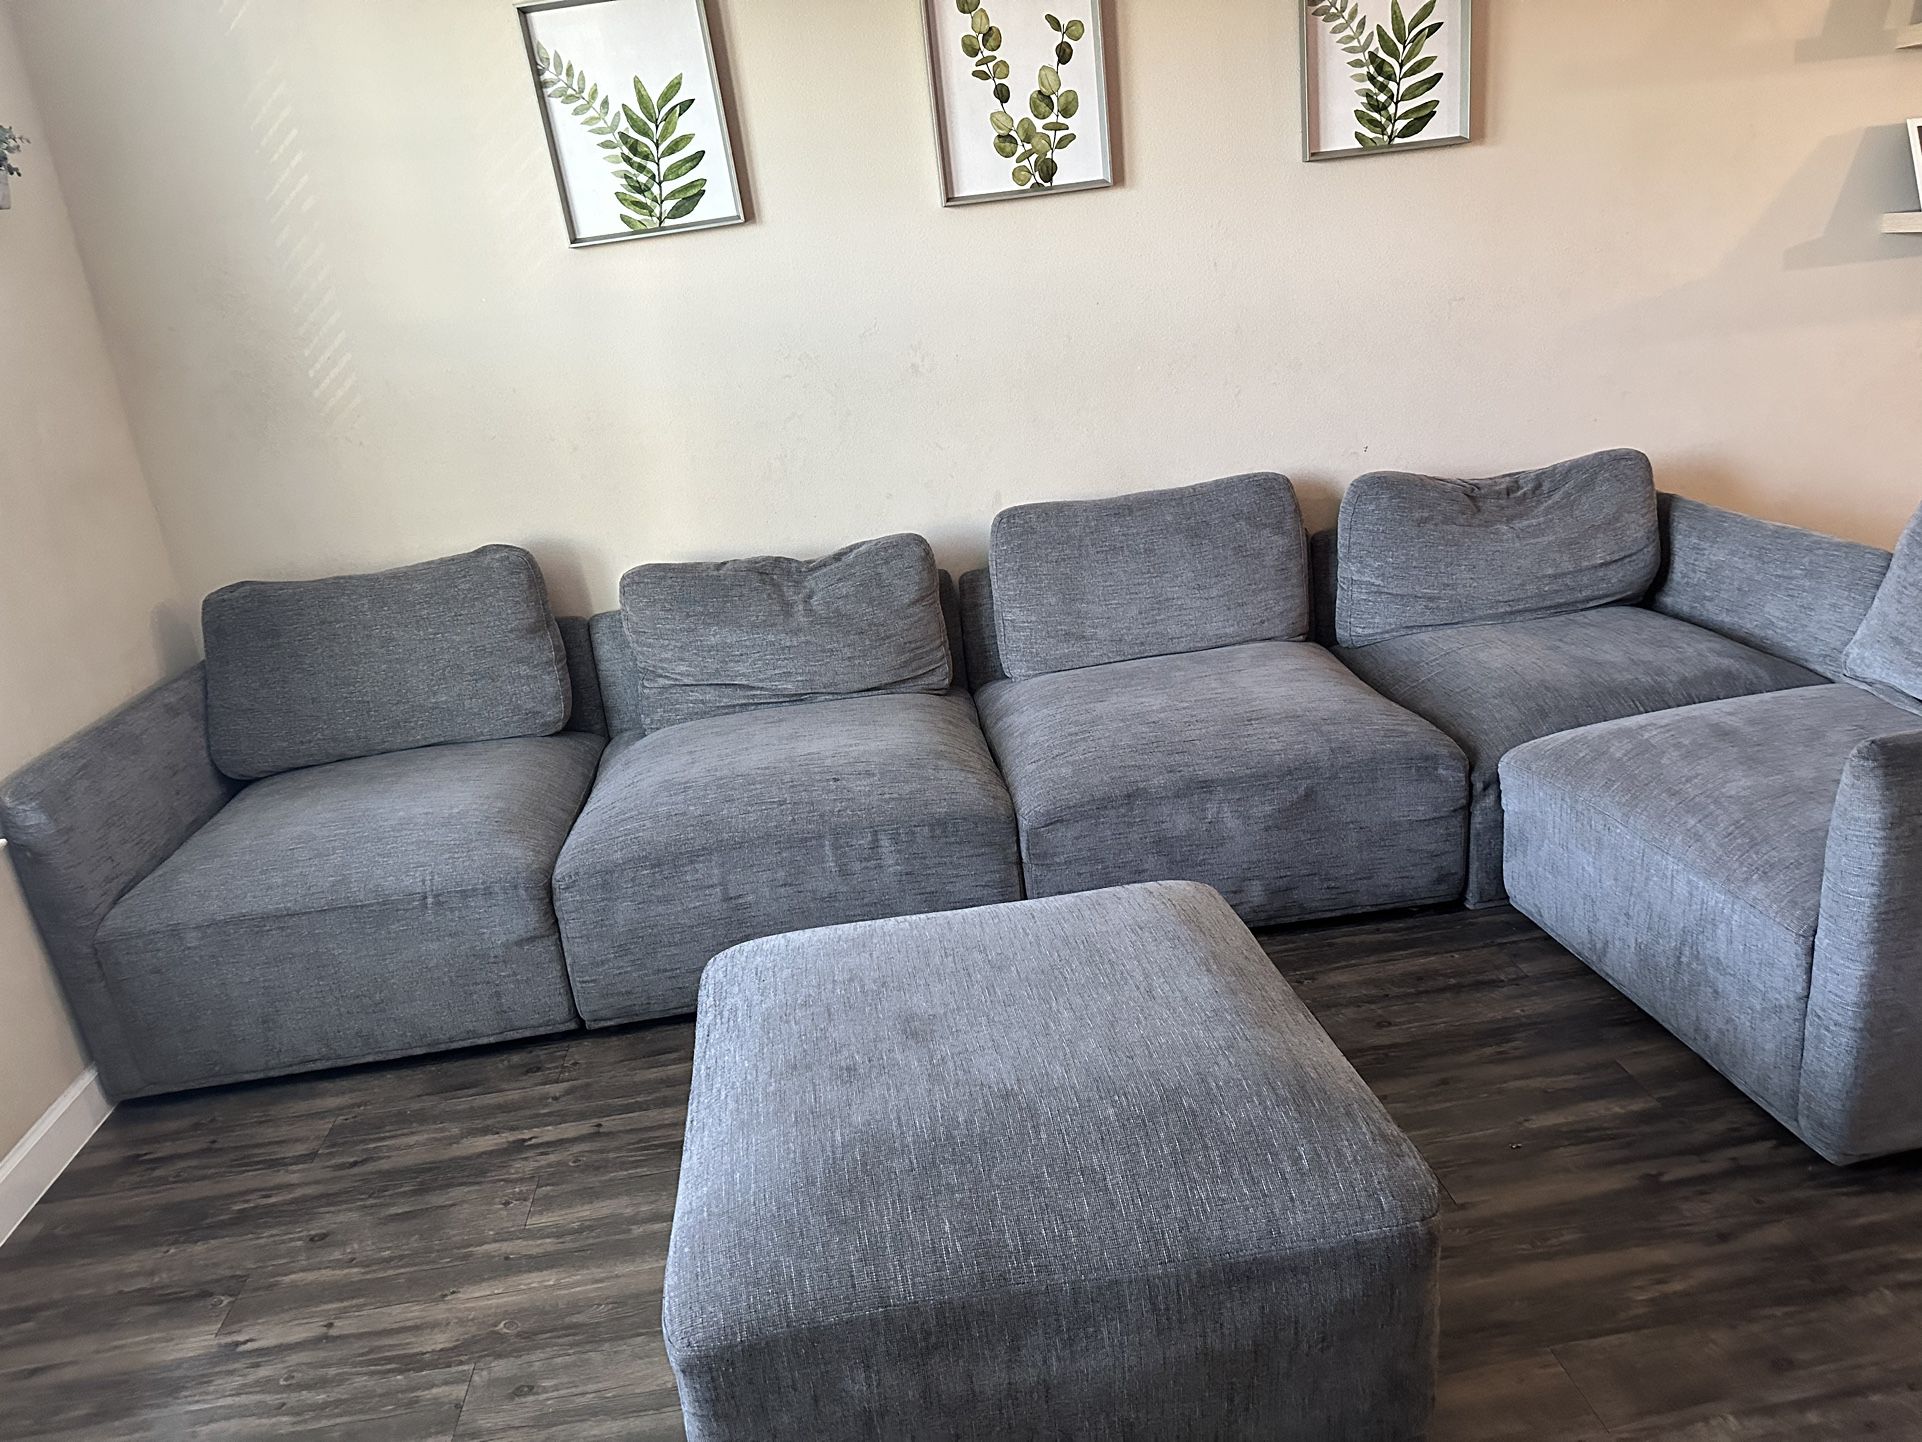 6 Piece Sectional Couch With Ottoman 